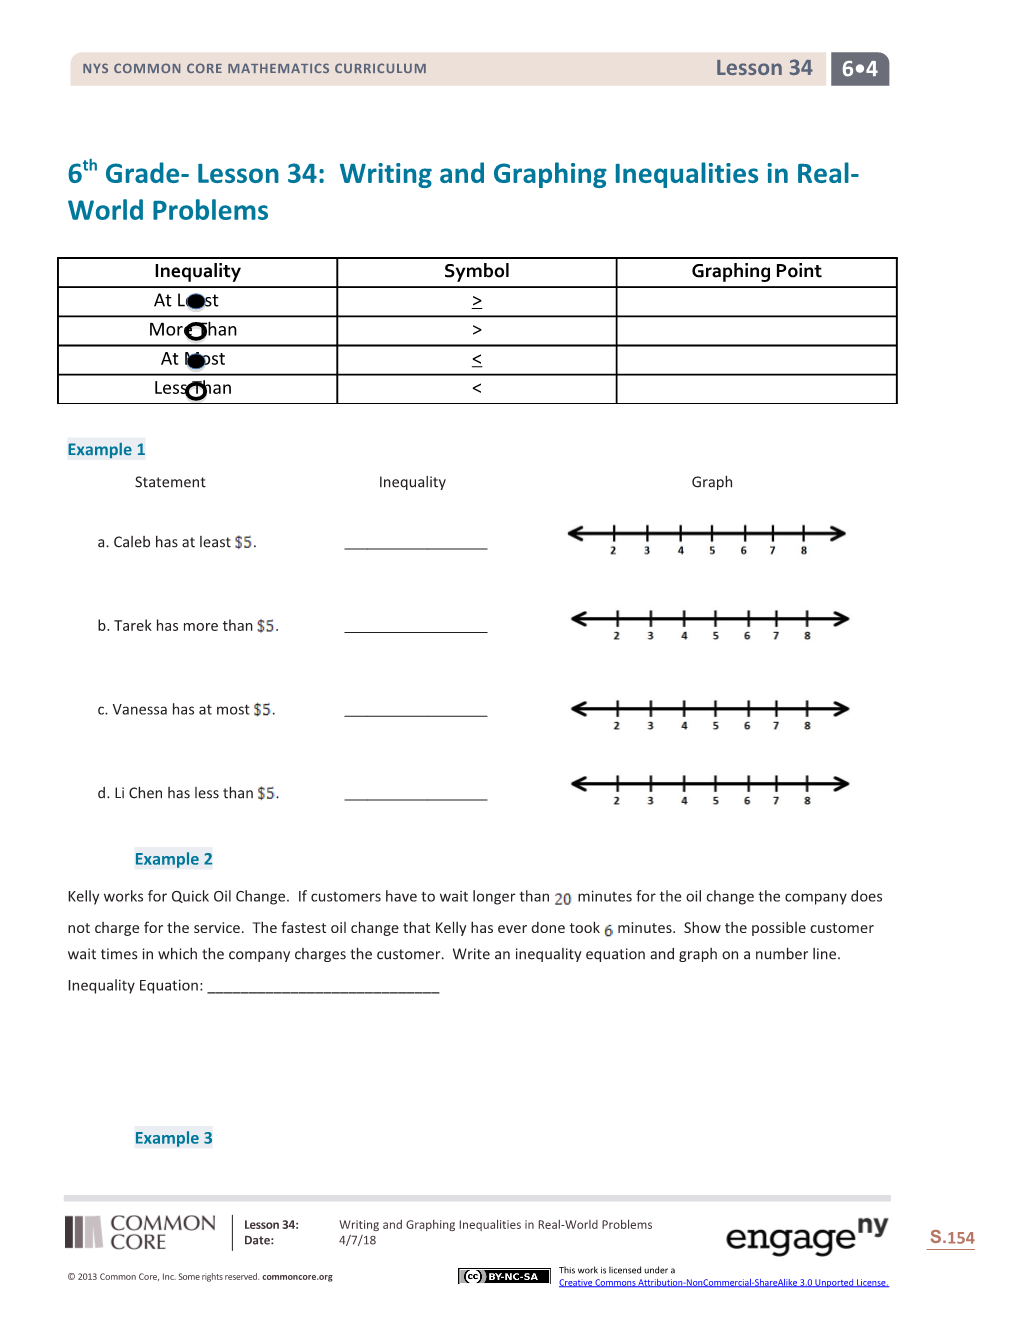 6Th Grade- Lesson 34: Writing and Graphing Inequalities in Real-World Problems